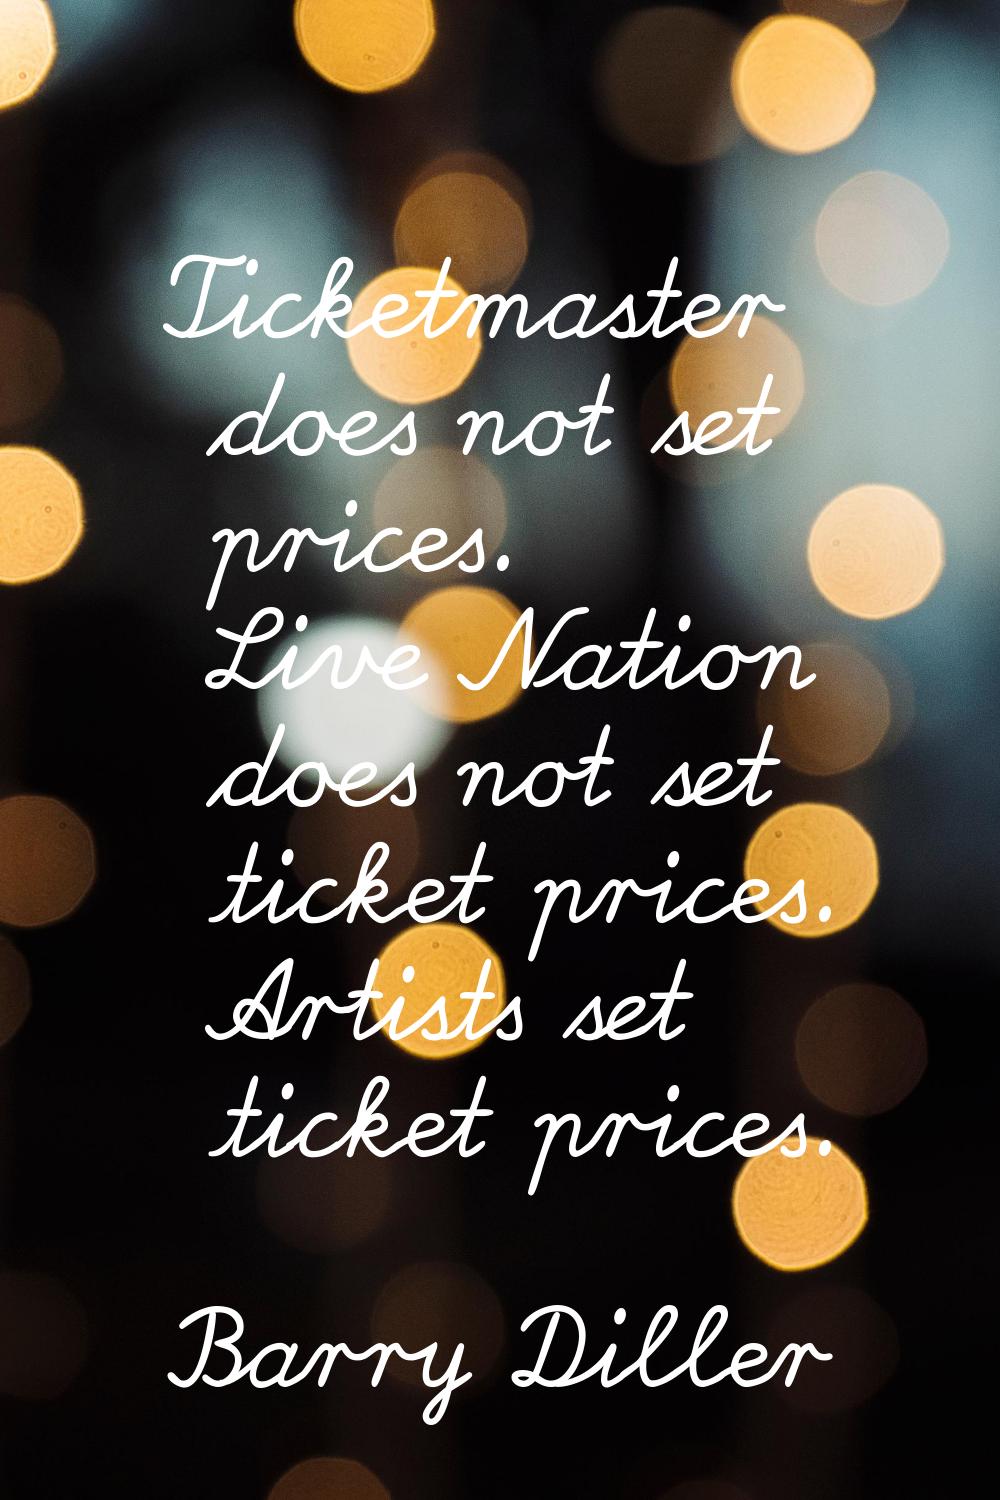 Ticketmaster does not set prices. Live Nation does not set ticket prices. Artists set ticket prices